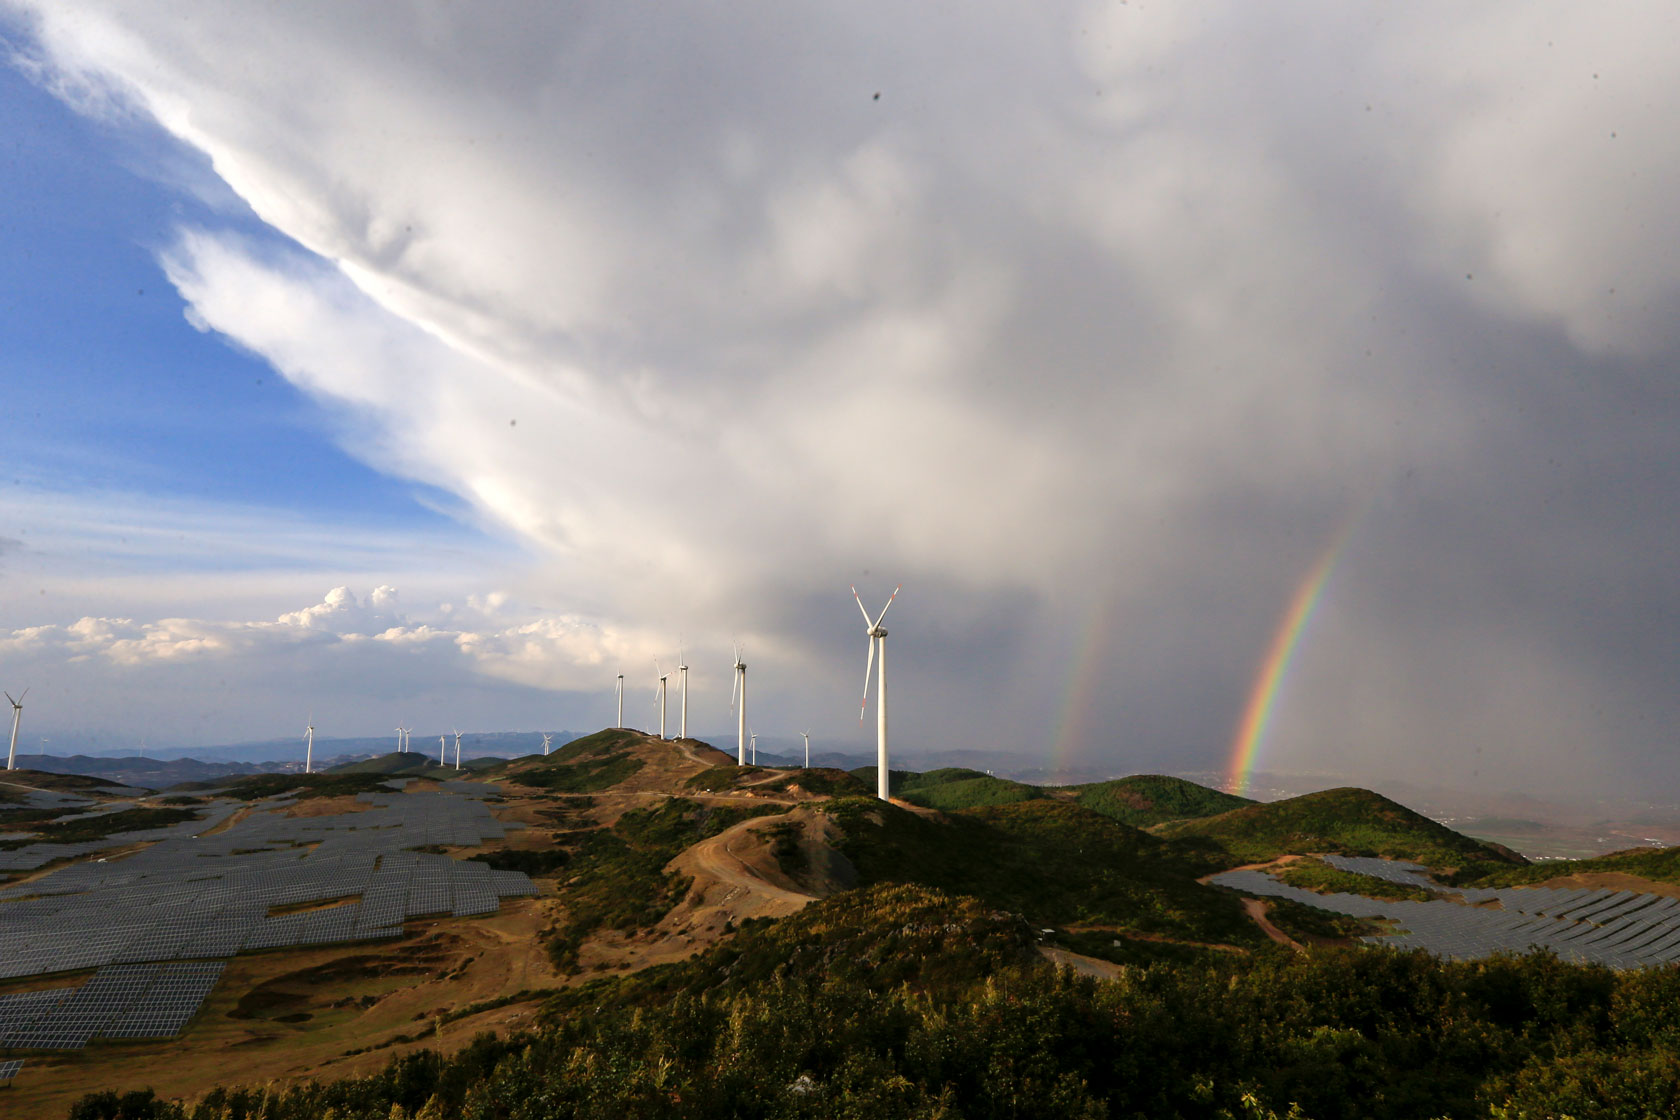 A line of windmills is seen at the top of a hill with solar panels in a valley to the left and a rainbow to the right.